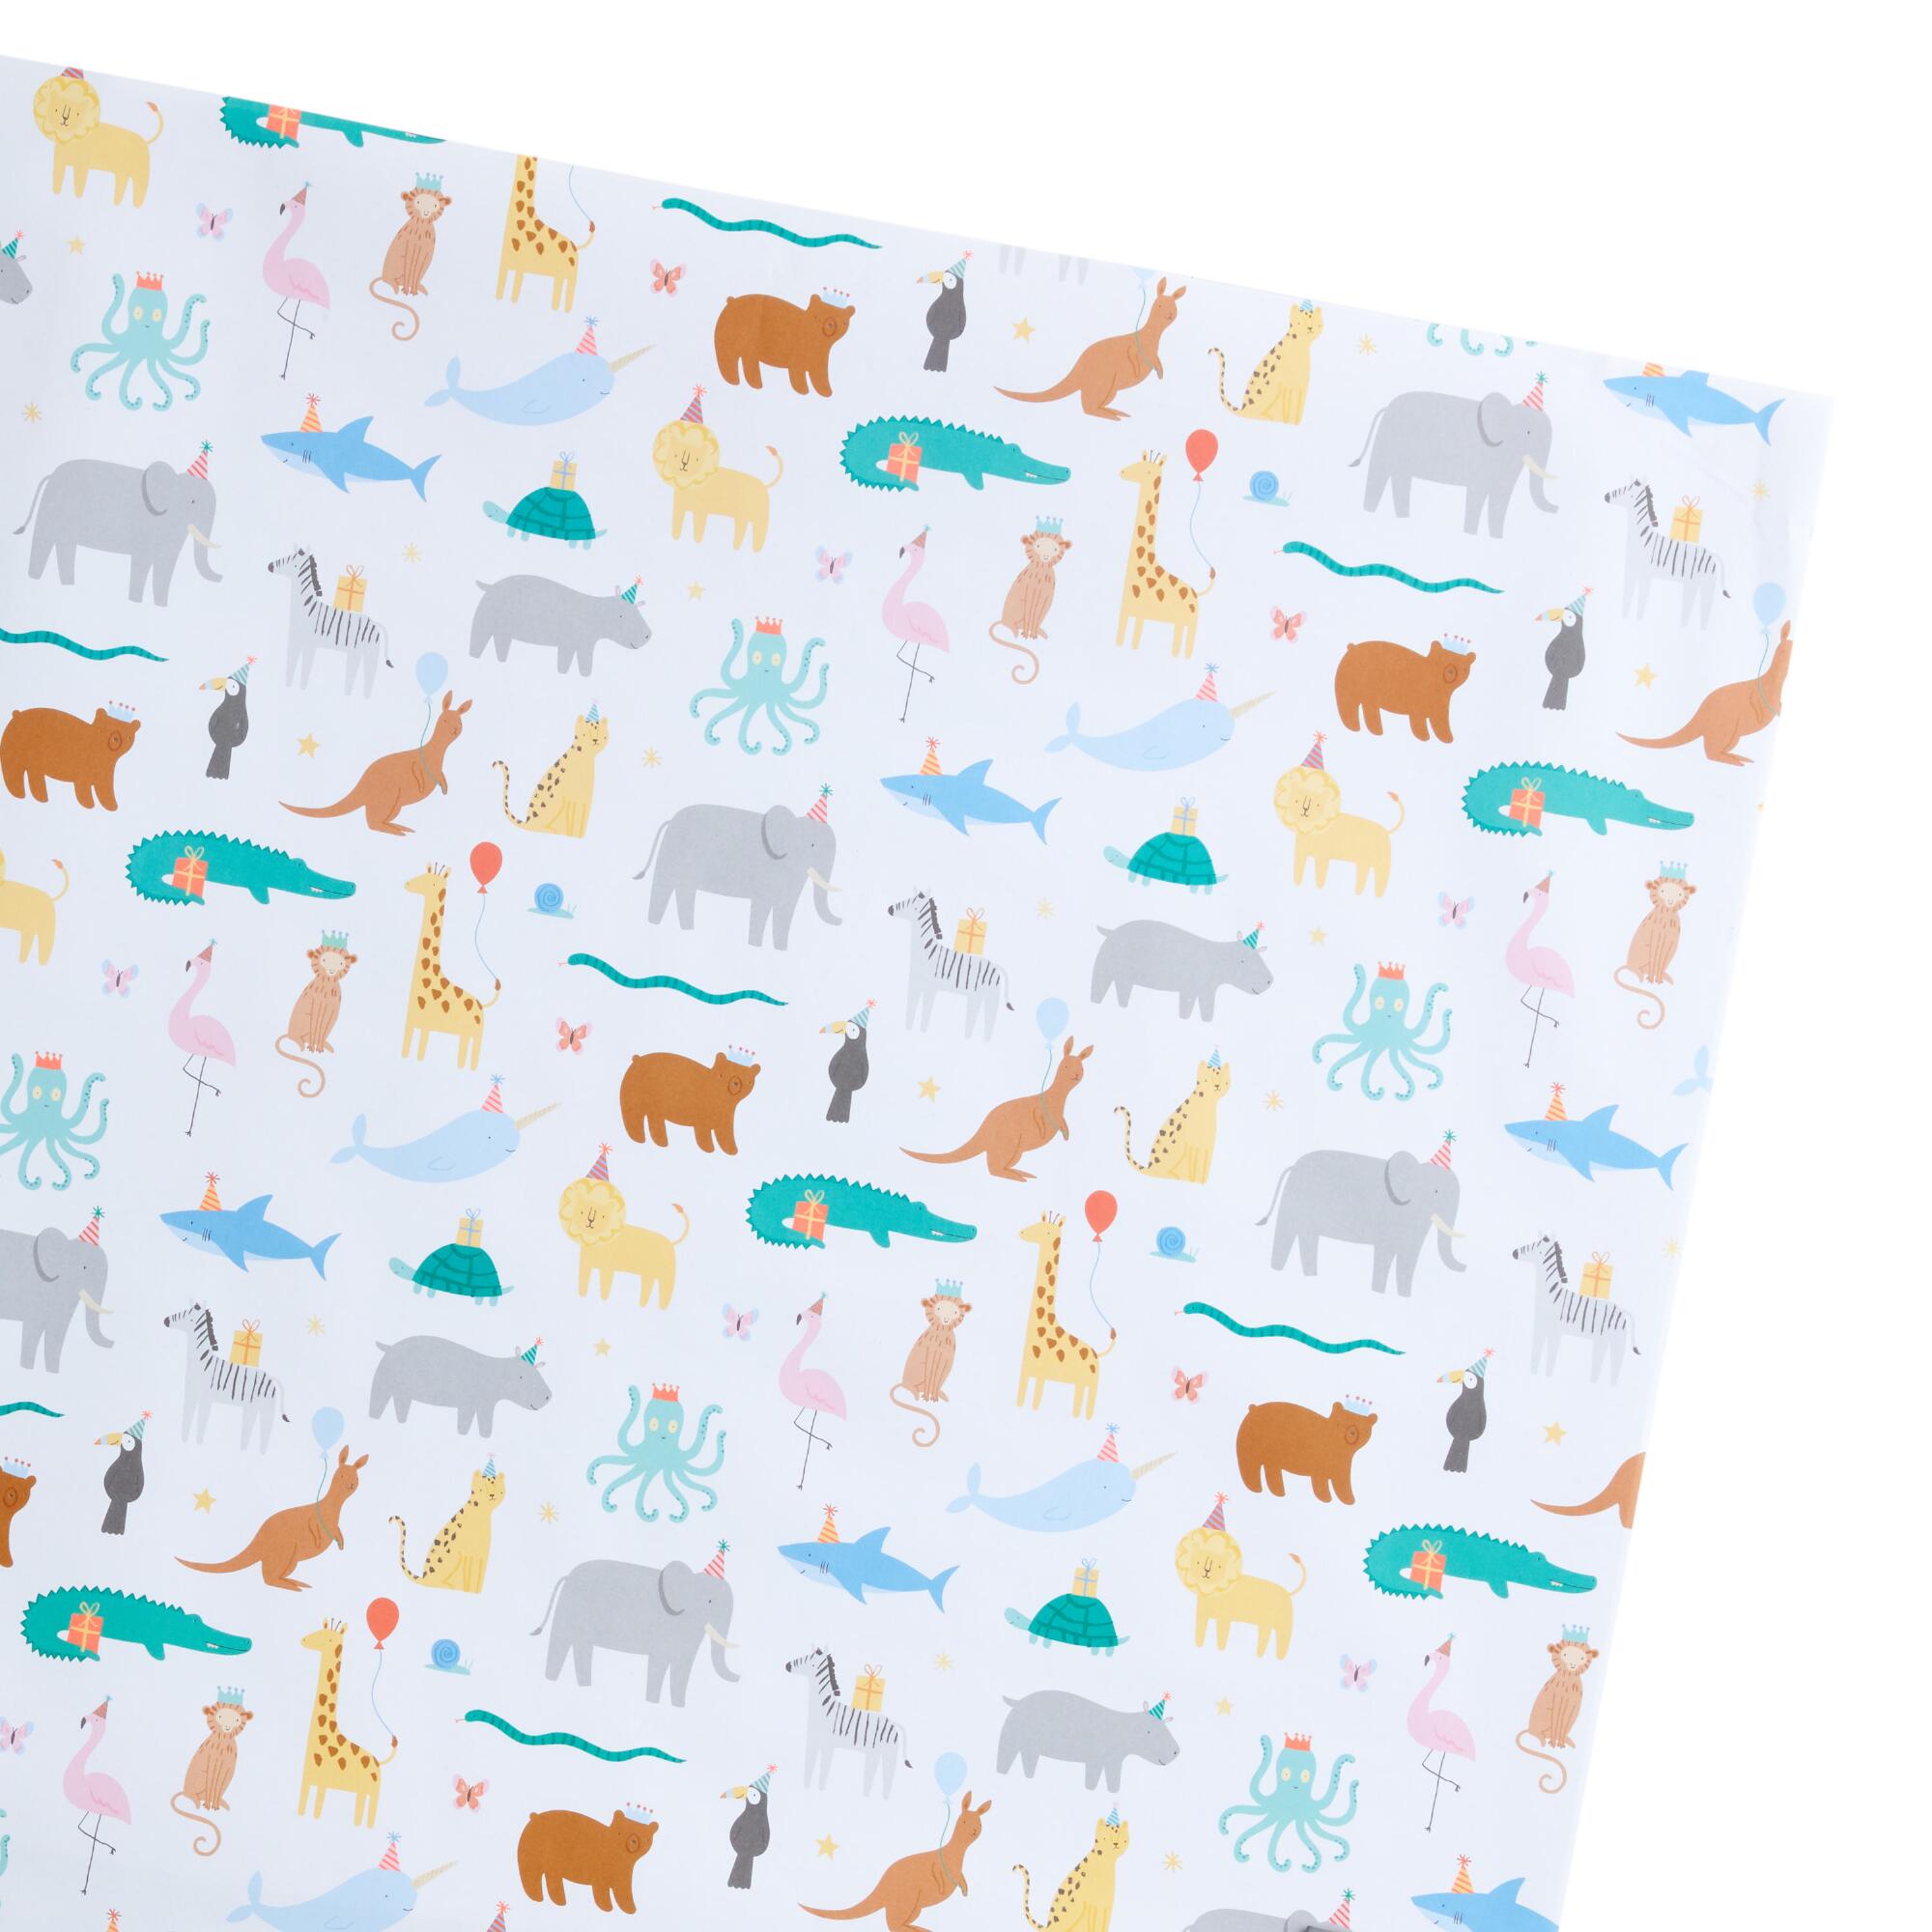 Animal Party Wrapping Paper Sheets by World Market